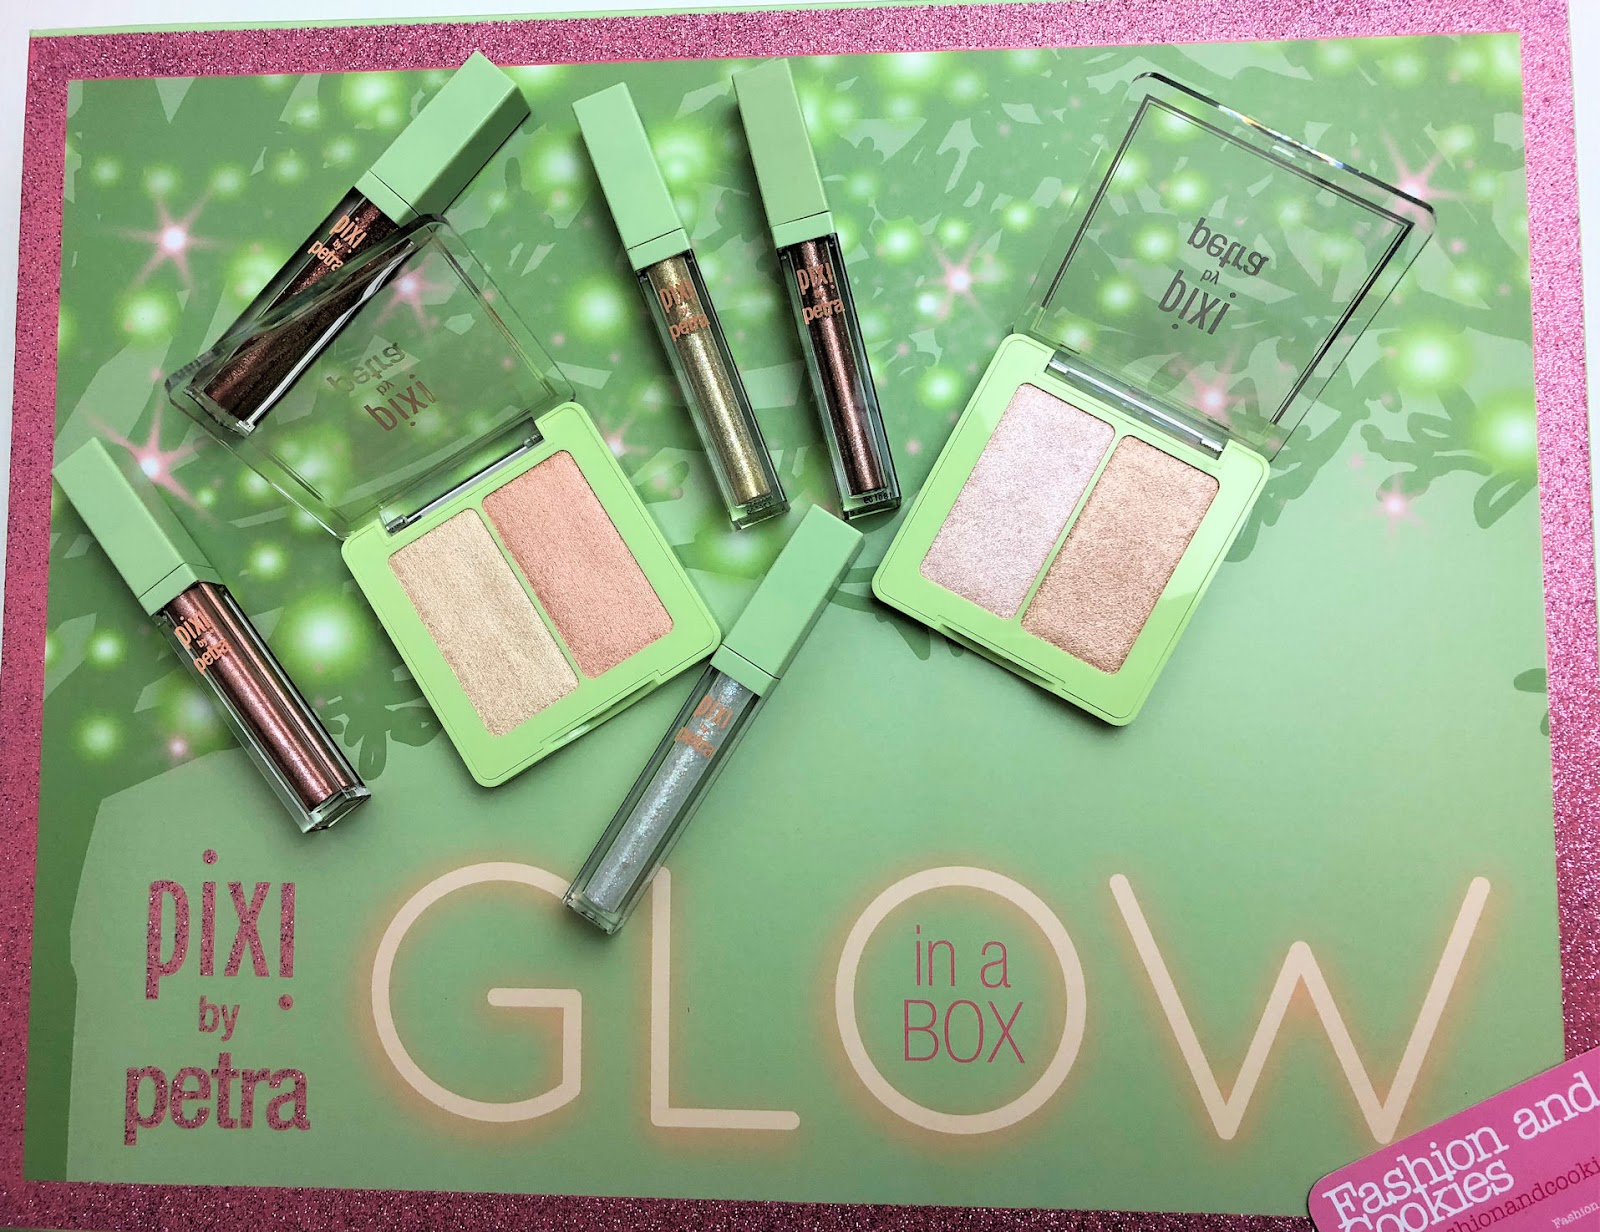 Pixi glow in a box collection review on Fashion and Cookies beauty blog, beauty blogger